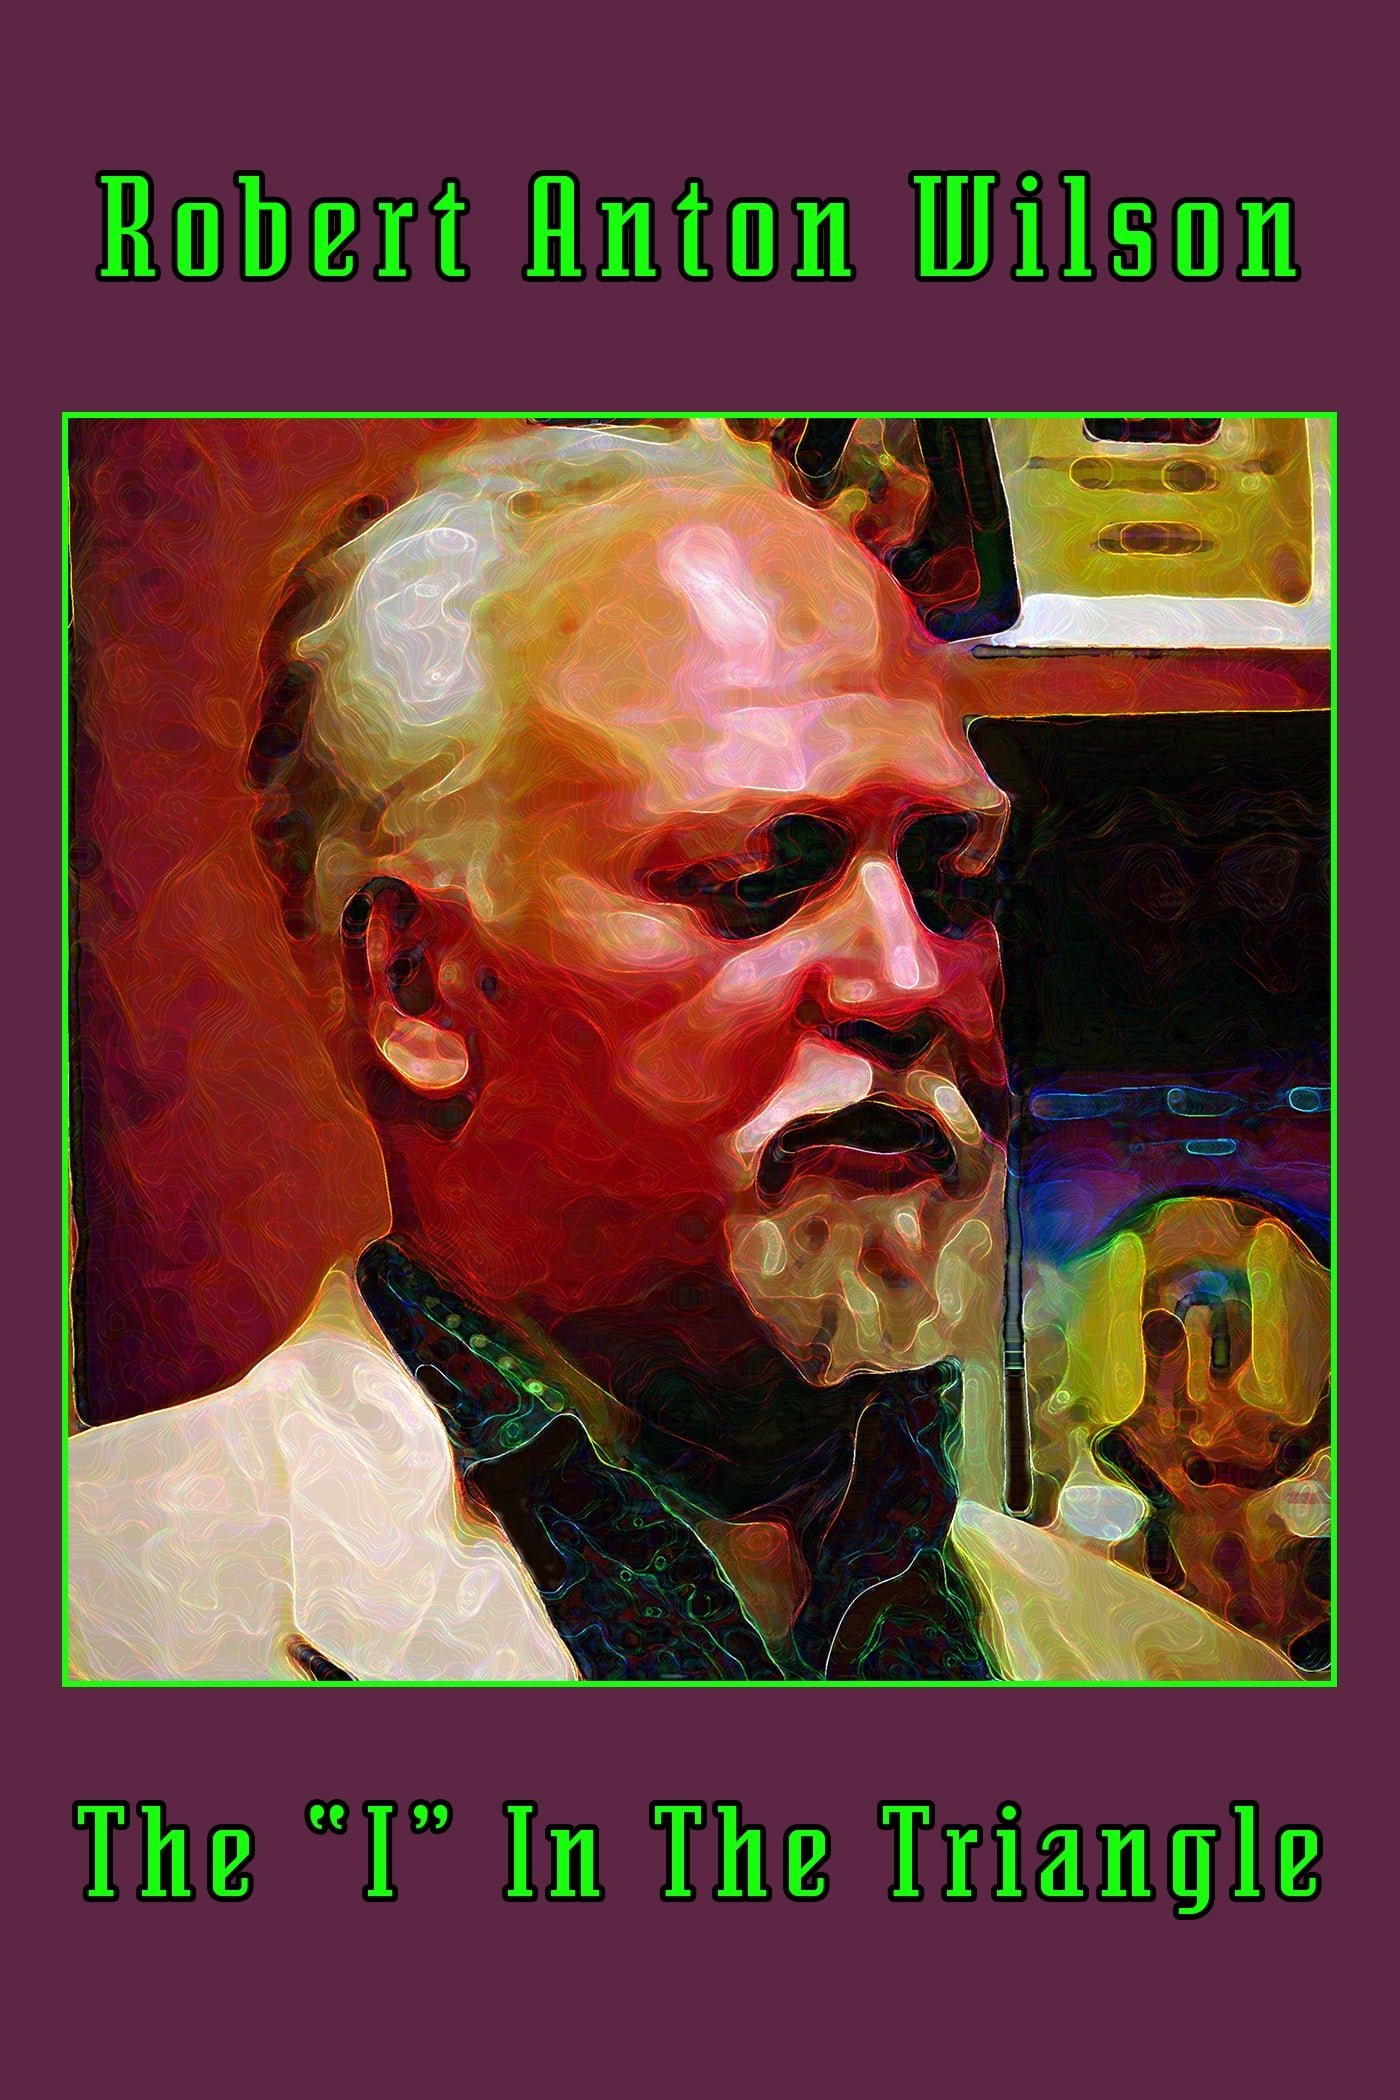 Robert Anton Wilson: The "I" In The Triangle